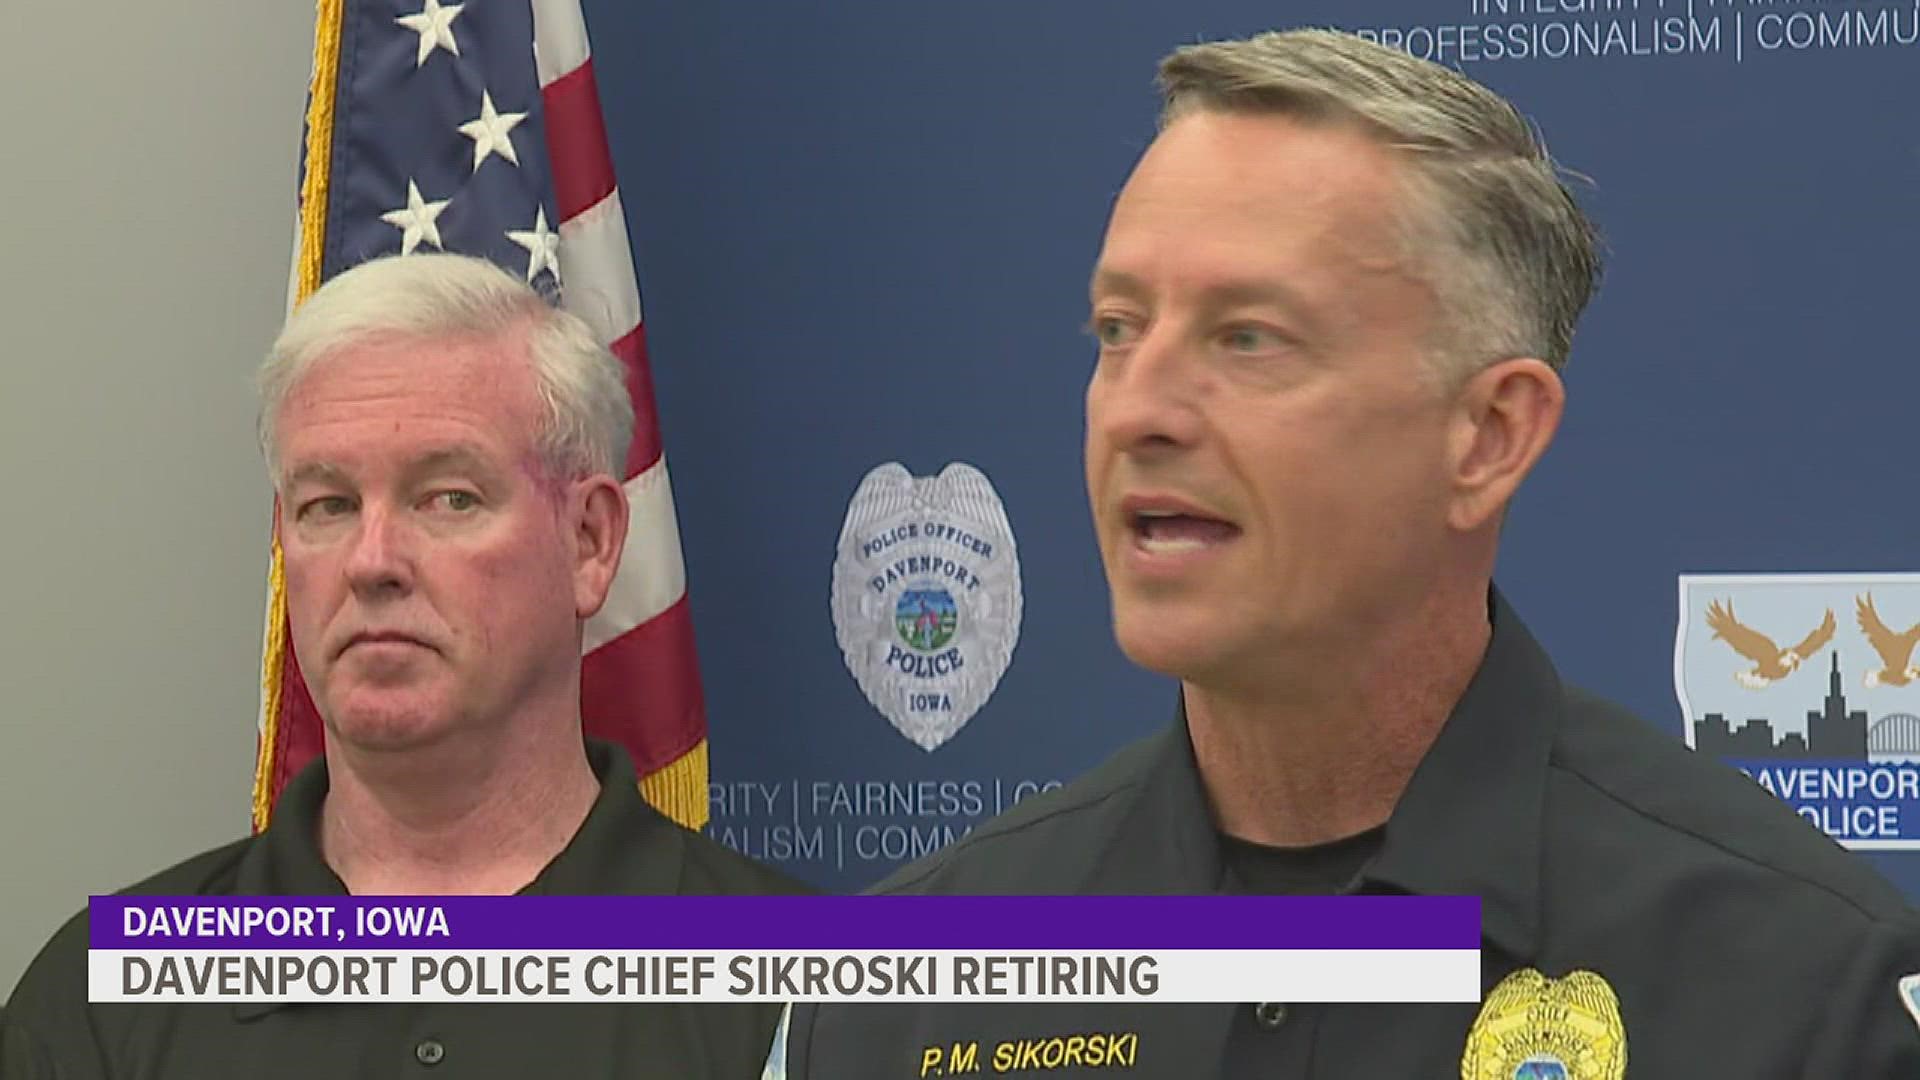 Chief Paul Sikorski's career in law enforcement began in 1988. He has served the agency in every division during his tenure, according to the department.